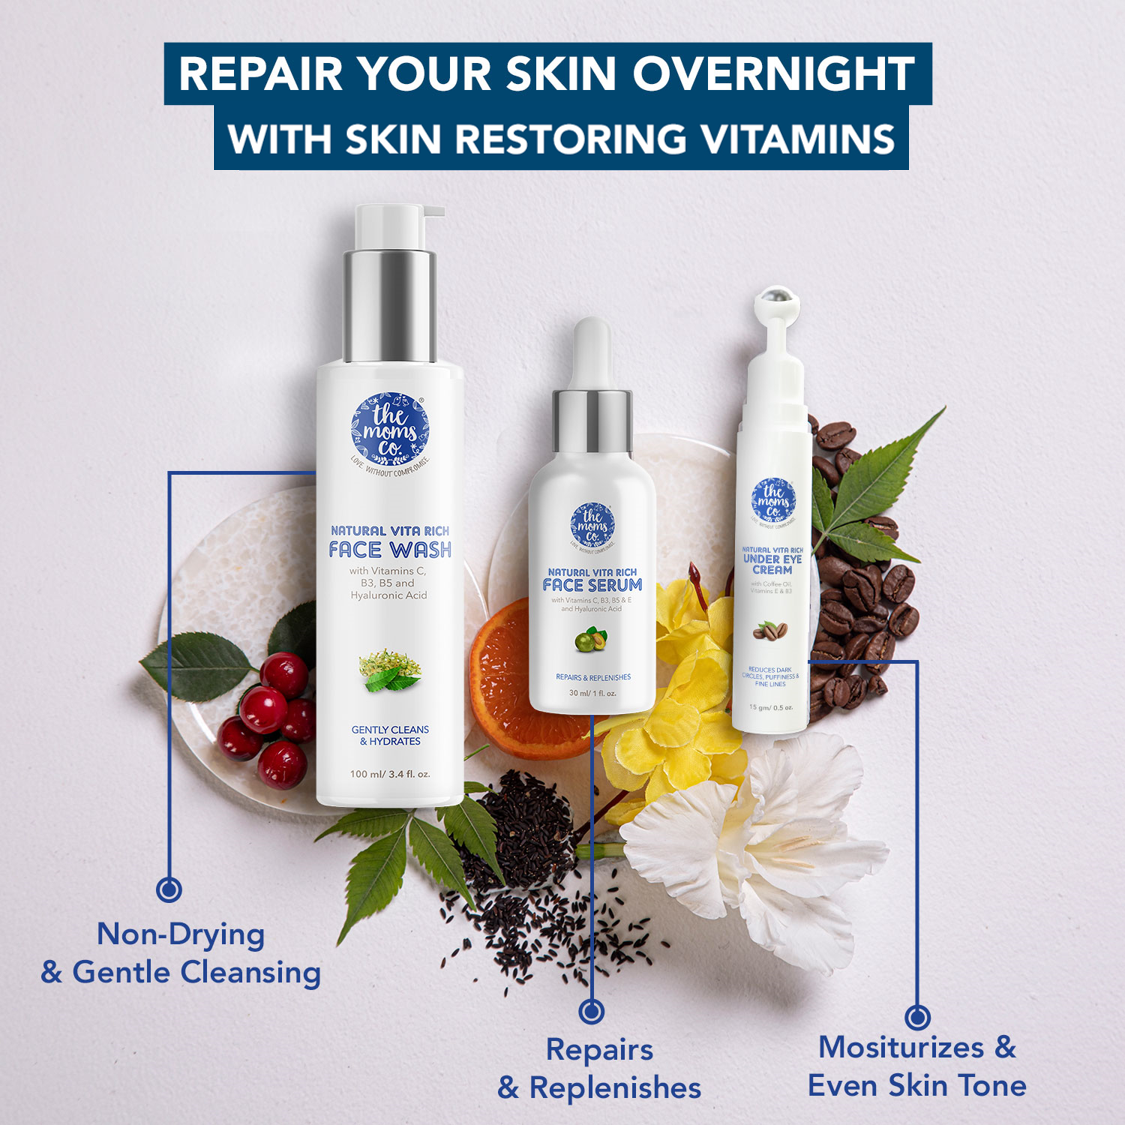 The Moms Co Natural Vita Rich Night Repair Combo with Vitamin C Face Wash, Face Serum & Under Eye Cream